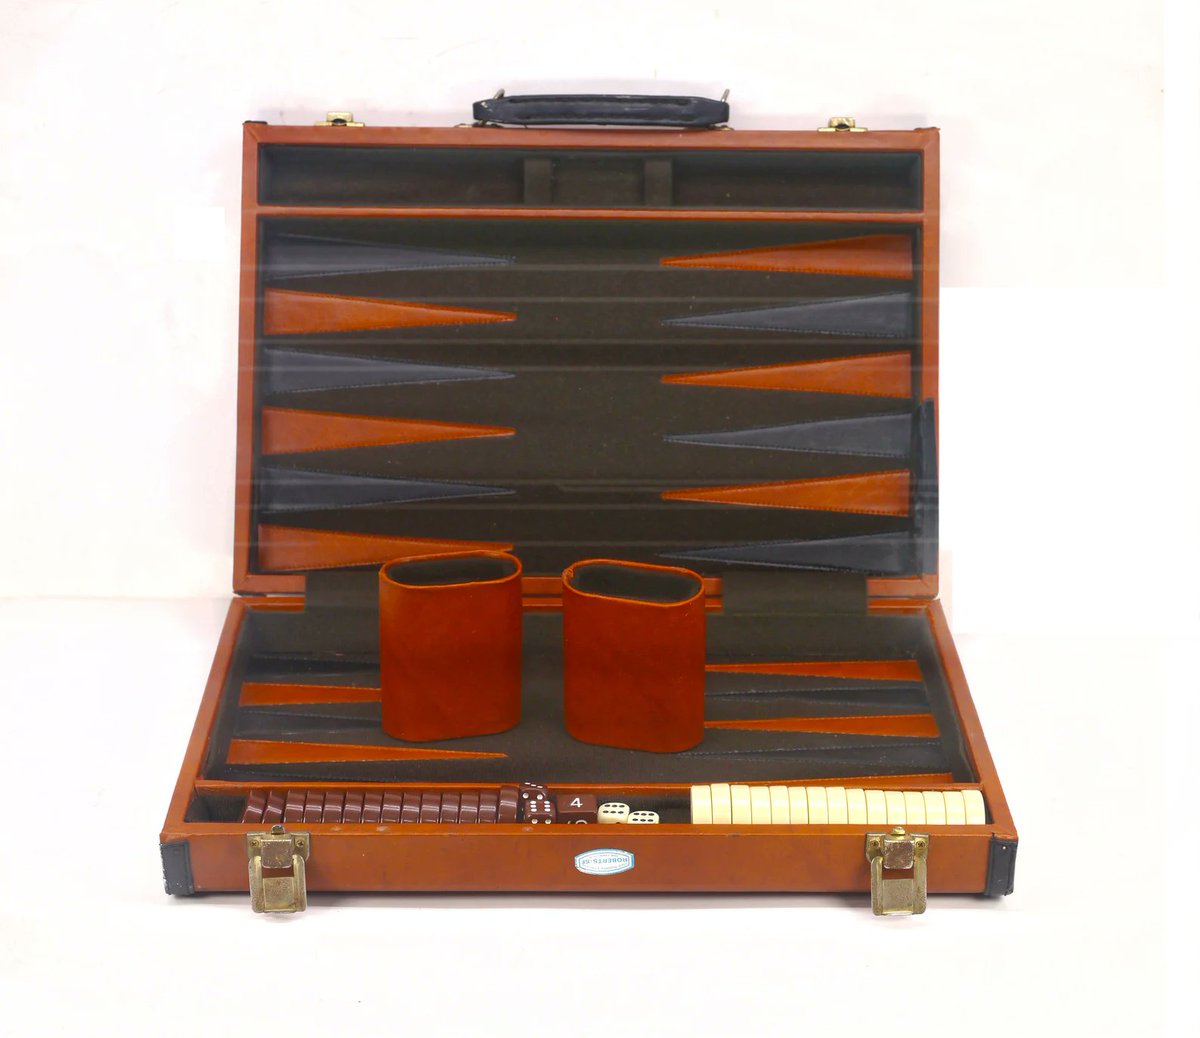 Fred Roberts California briefcase backgammon set. etsy.me/3QD6rJE via @Etsy #BuyfromGroovy #antiqueshop #boardgame #vintageboardgame #vintagegame #backgammon #briefcasebackgammon #FredRobertsCalifornia #giftformen #EtsySellers